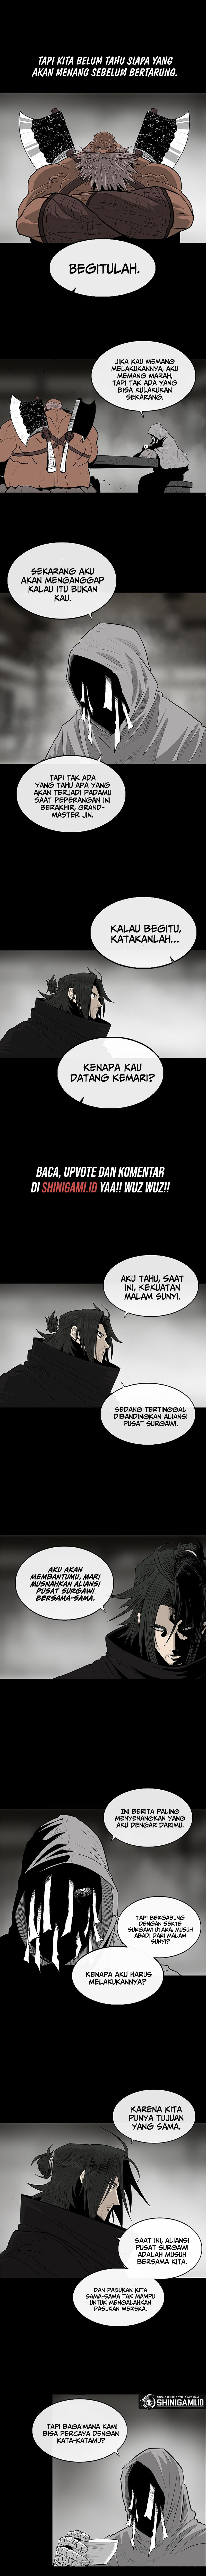 legend-of-the-northern-blade Chapter 159